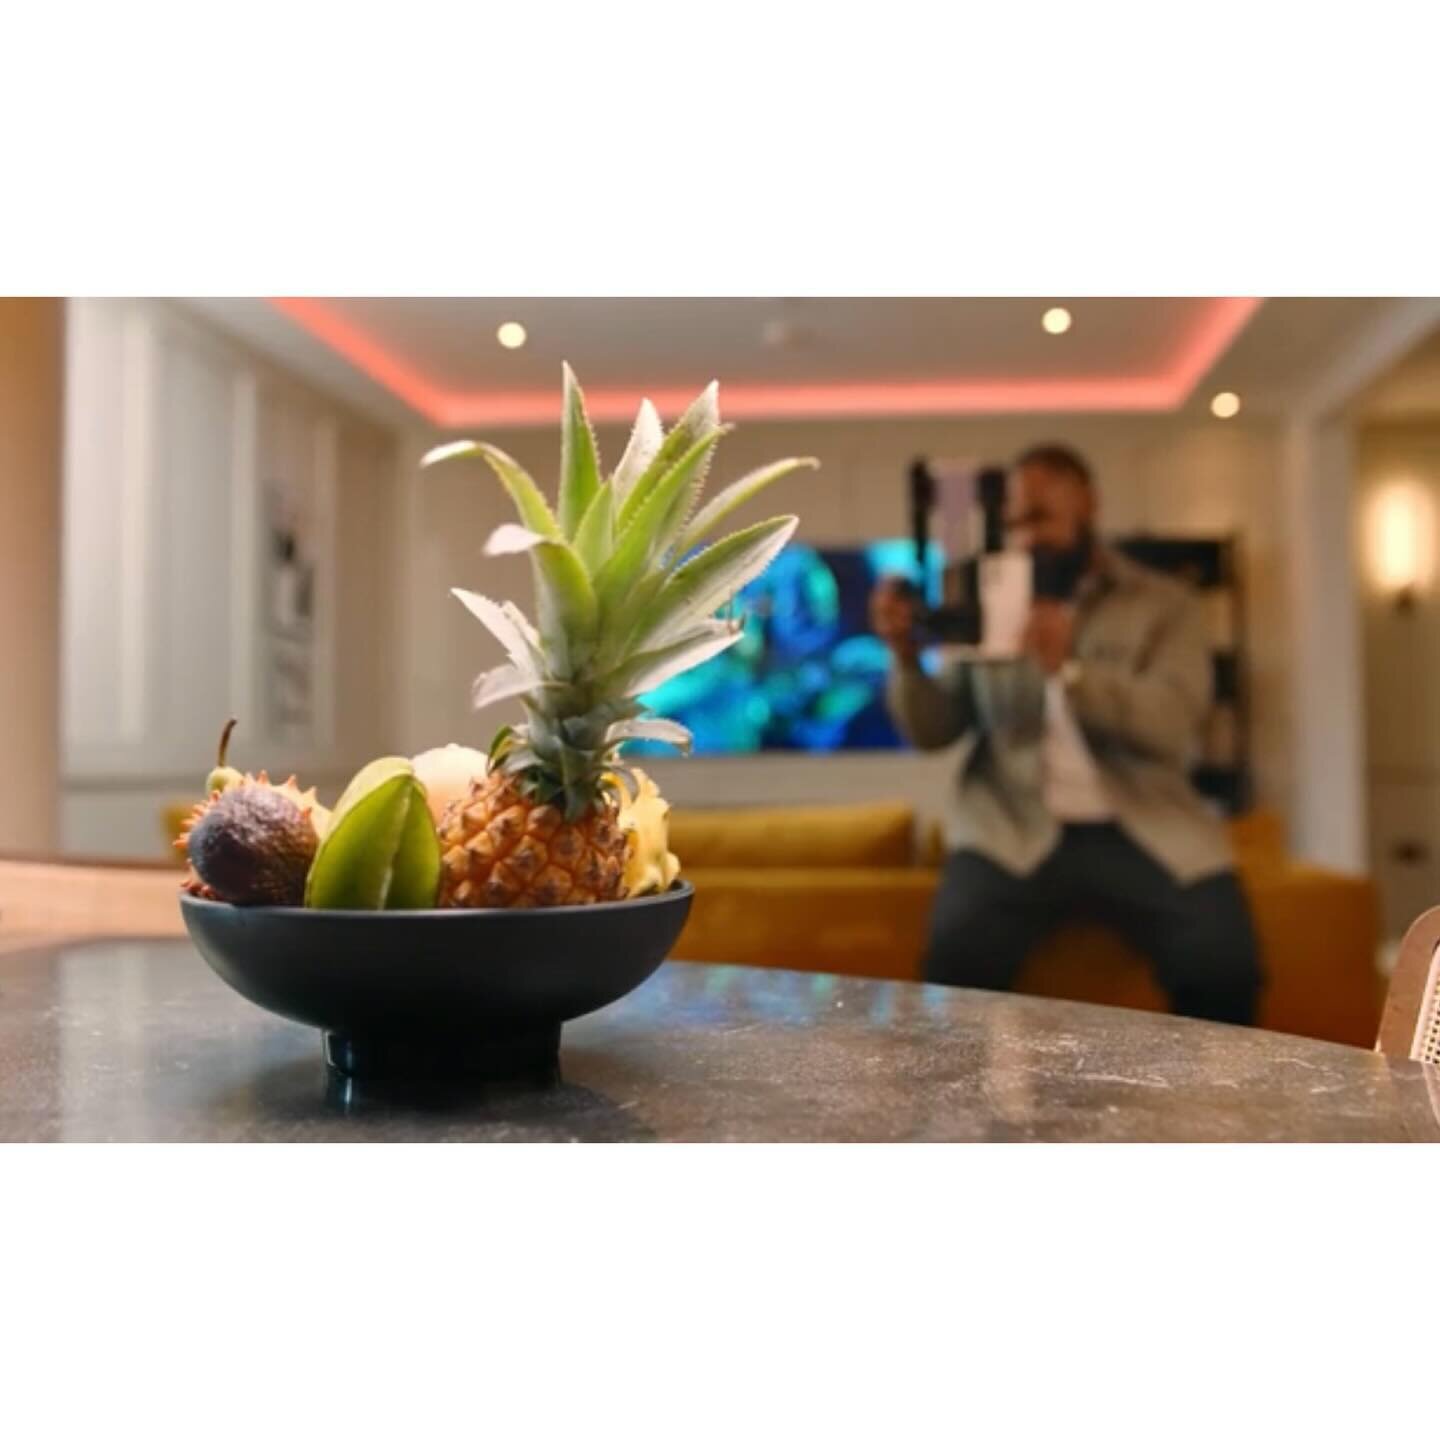 Some stills from a fun job sourcing &amp; styling exotic fruits for @samsunguk fancy new phone📱with @style_department 📸 Who&rsquo;s tried snake fruit? 🍈🐍🍑🍍🥝 #foodstyling #fruitbowl #advertising #workinginfood #samsung #production